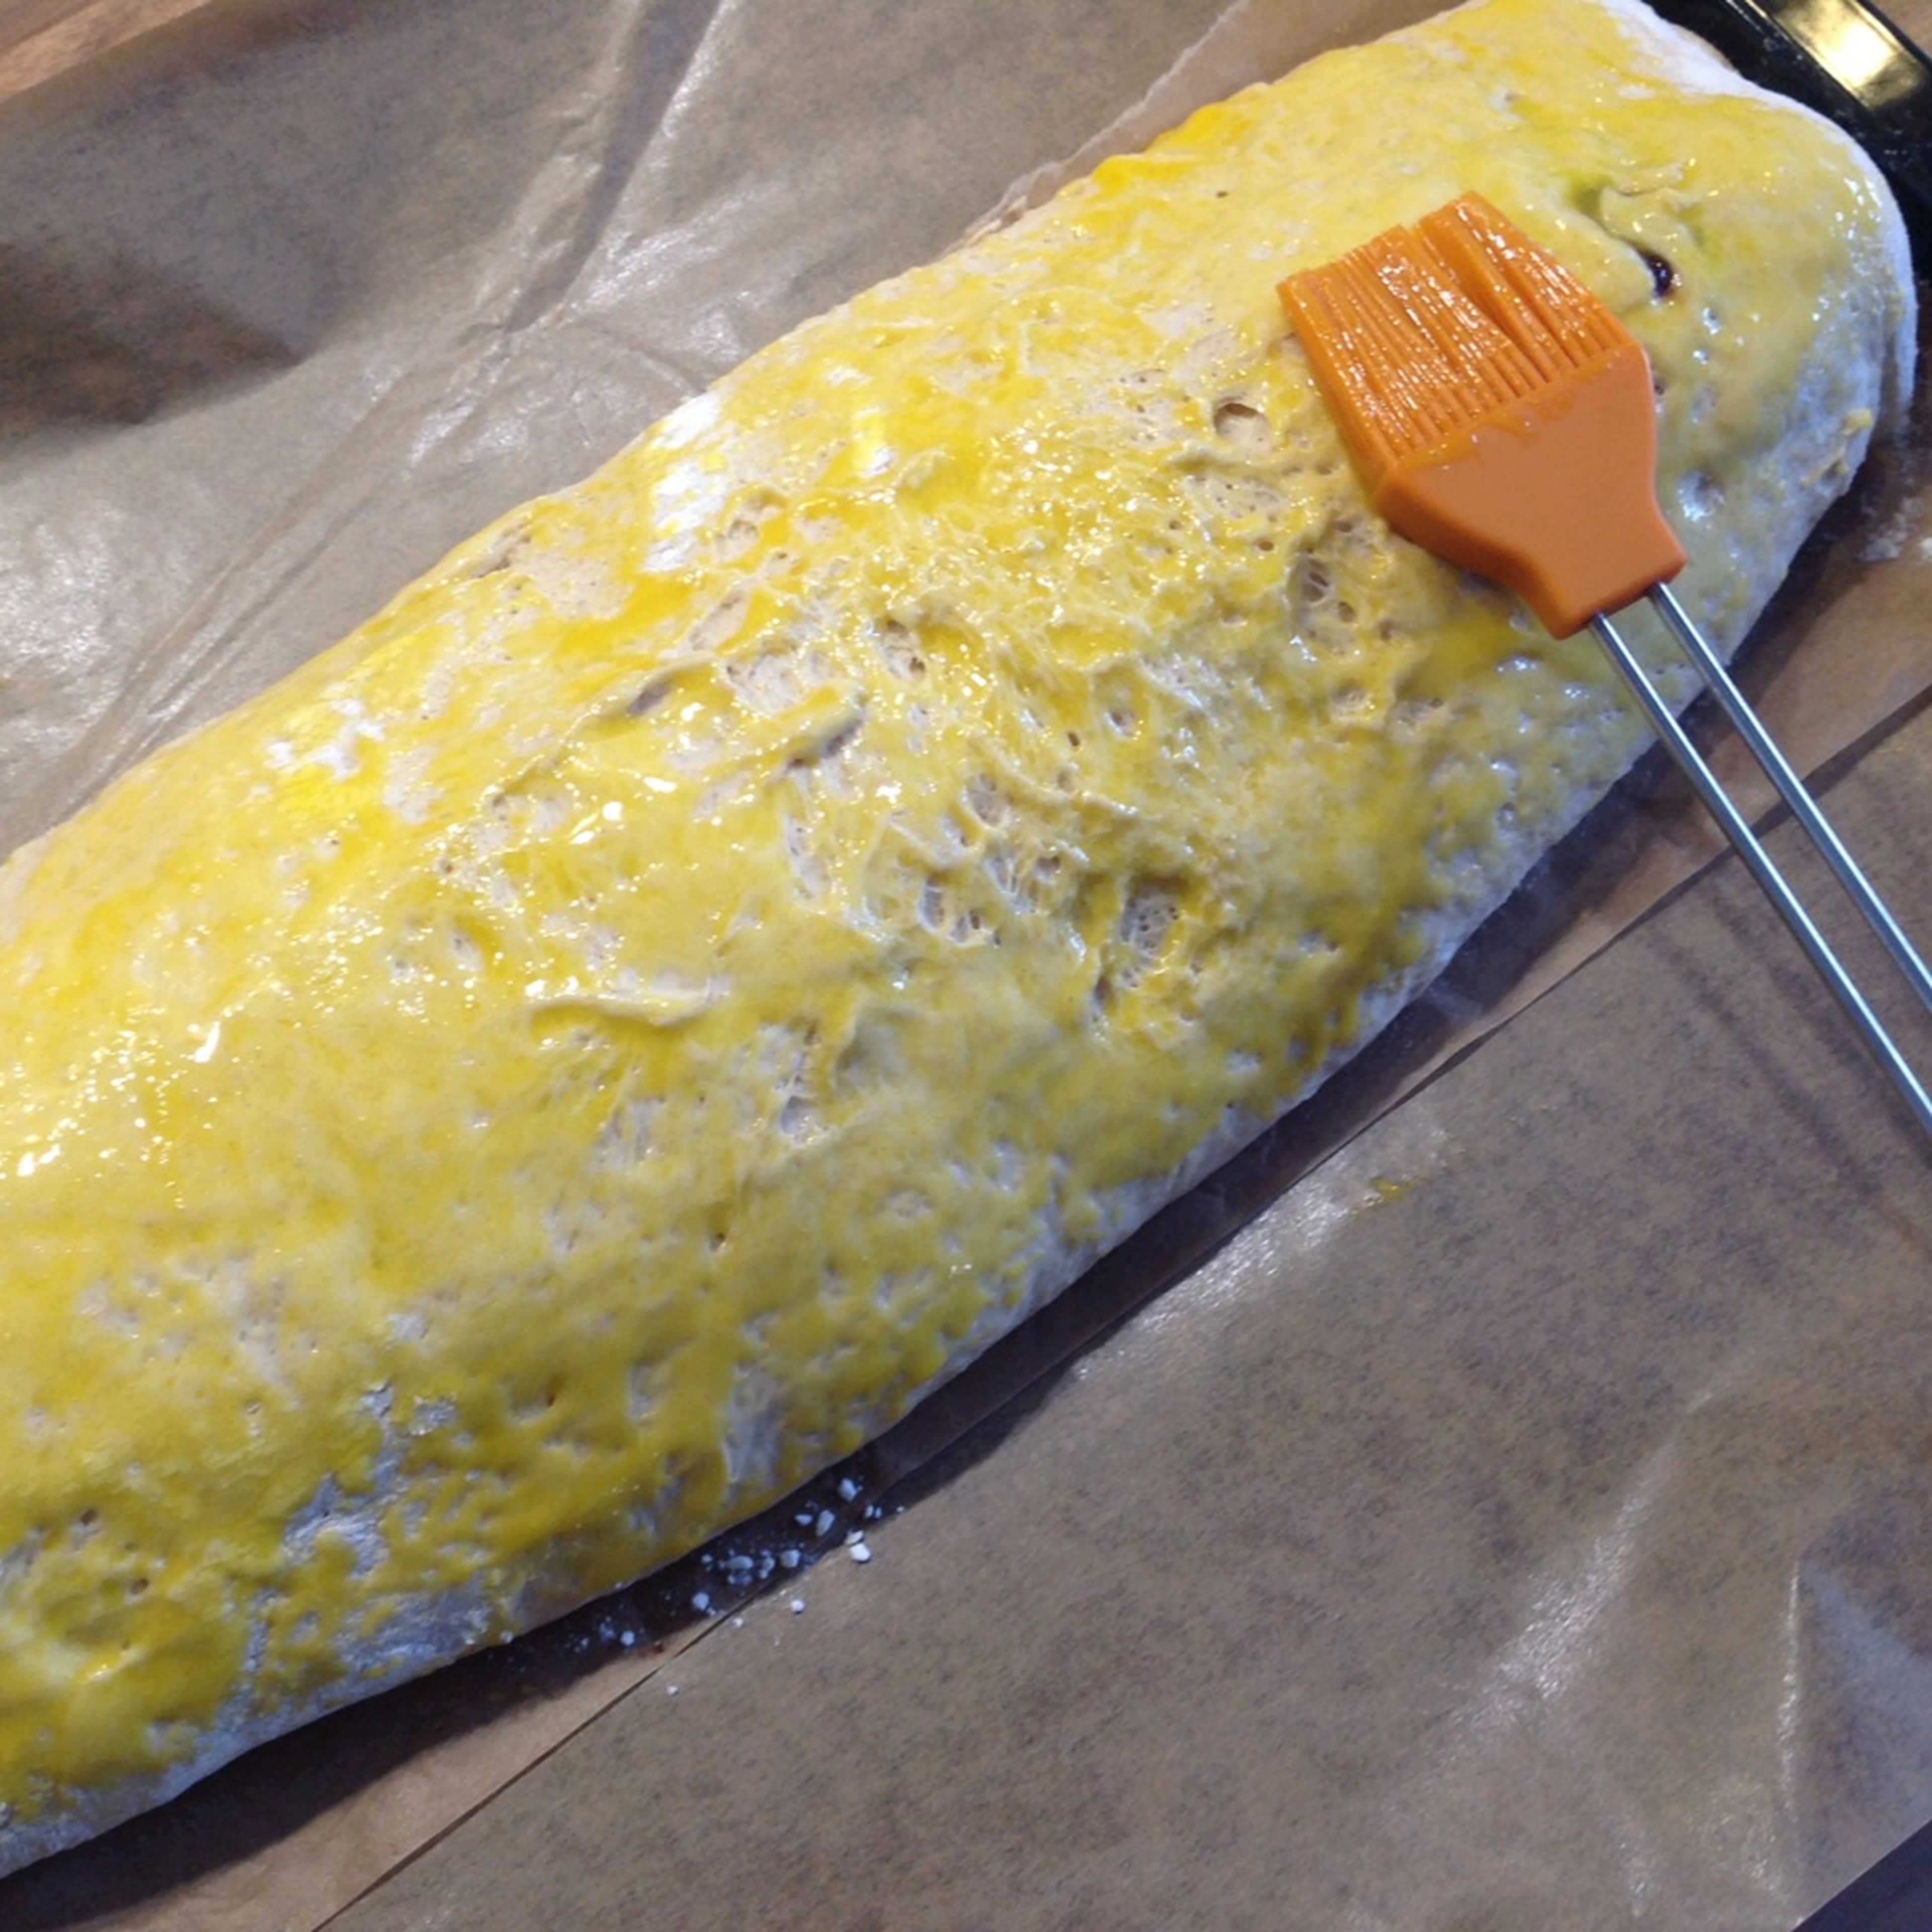 Brush with a beaten egg yolk. Bake in the oven at 180°C/350°F on the middle rack for approx. 40 min.